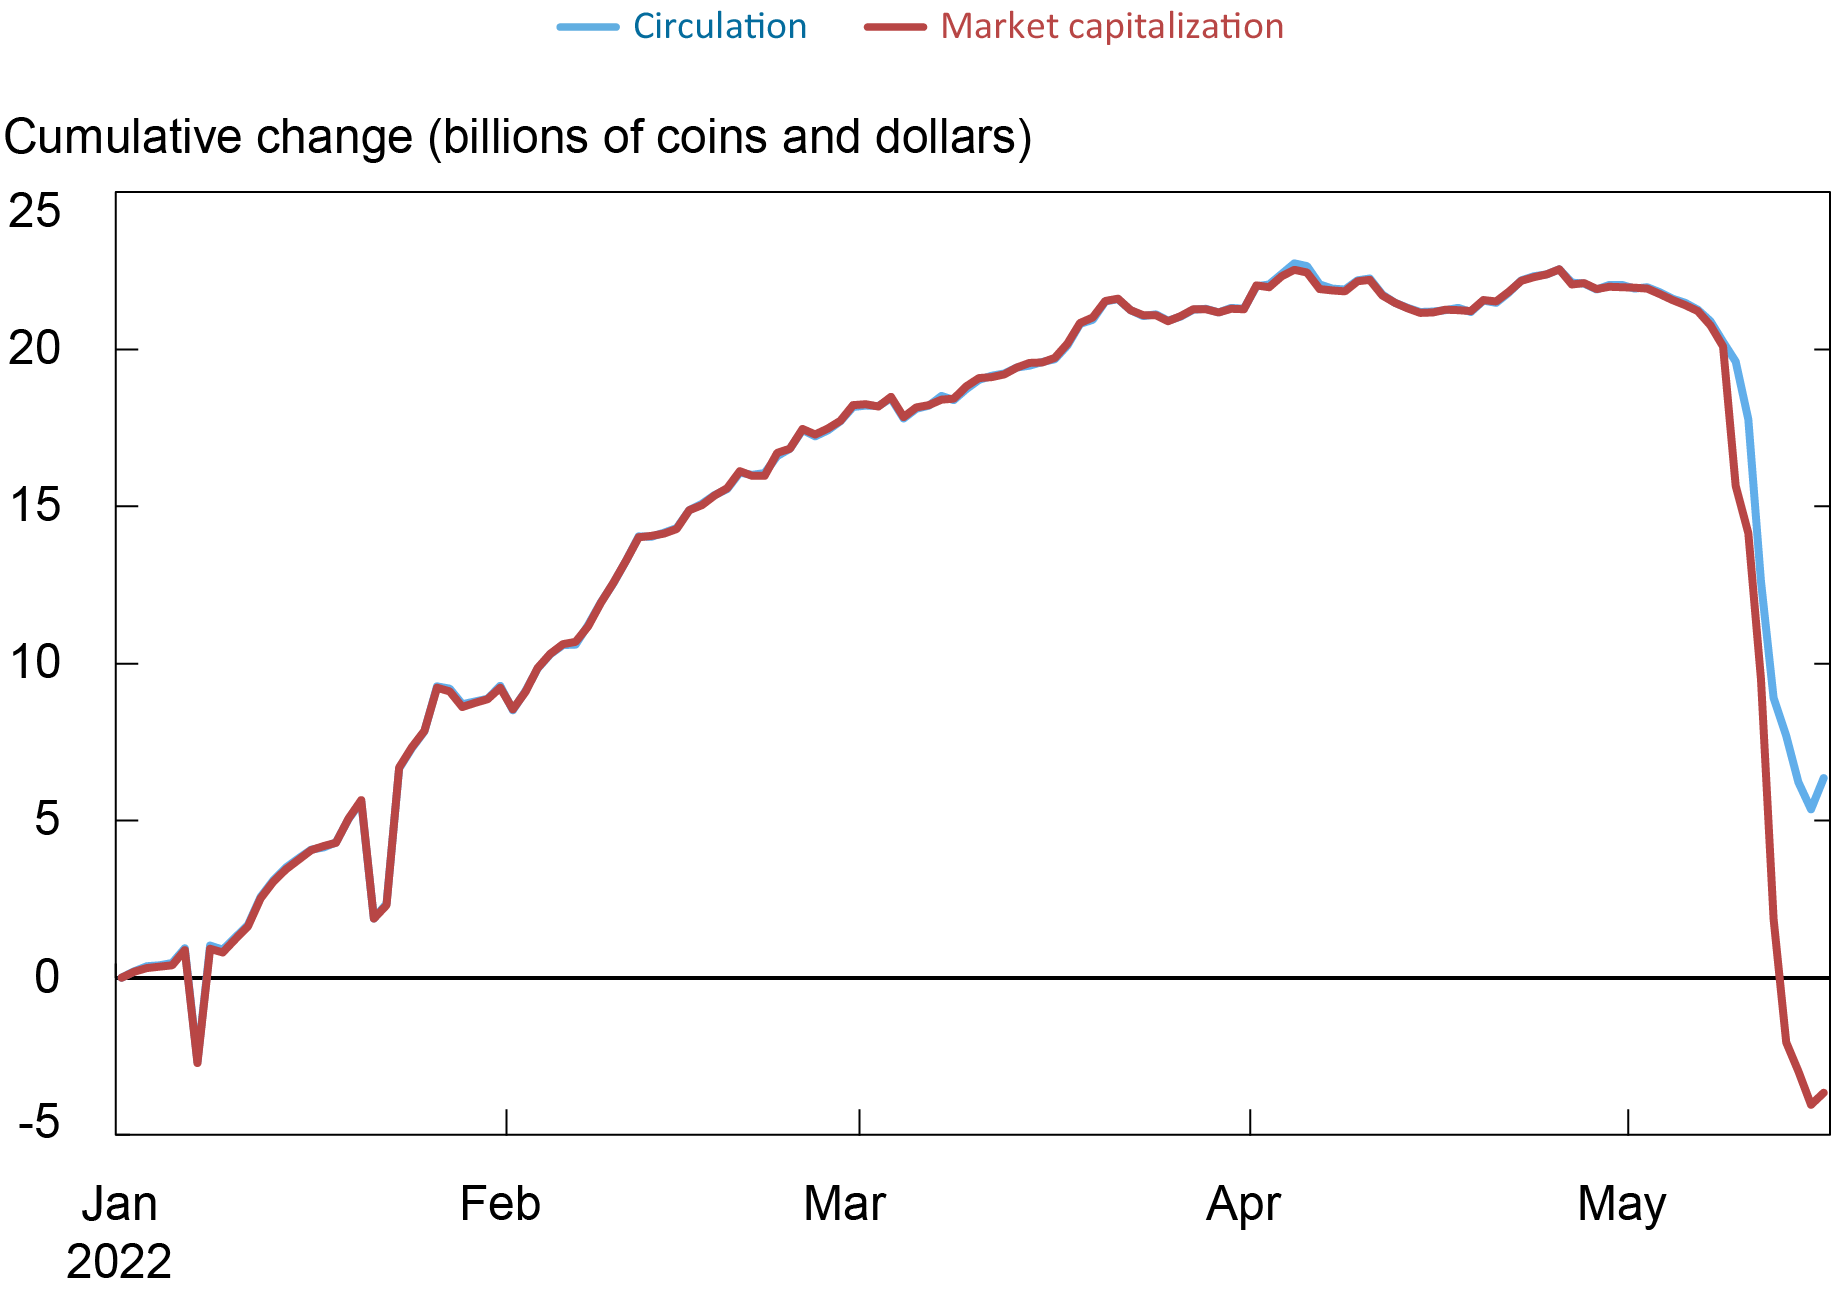 Liberty Street Economics chart showing cumulative change in stablecoin circulation and market capitalization from Jan to May 2022. 